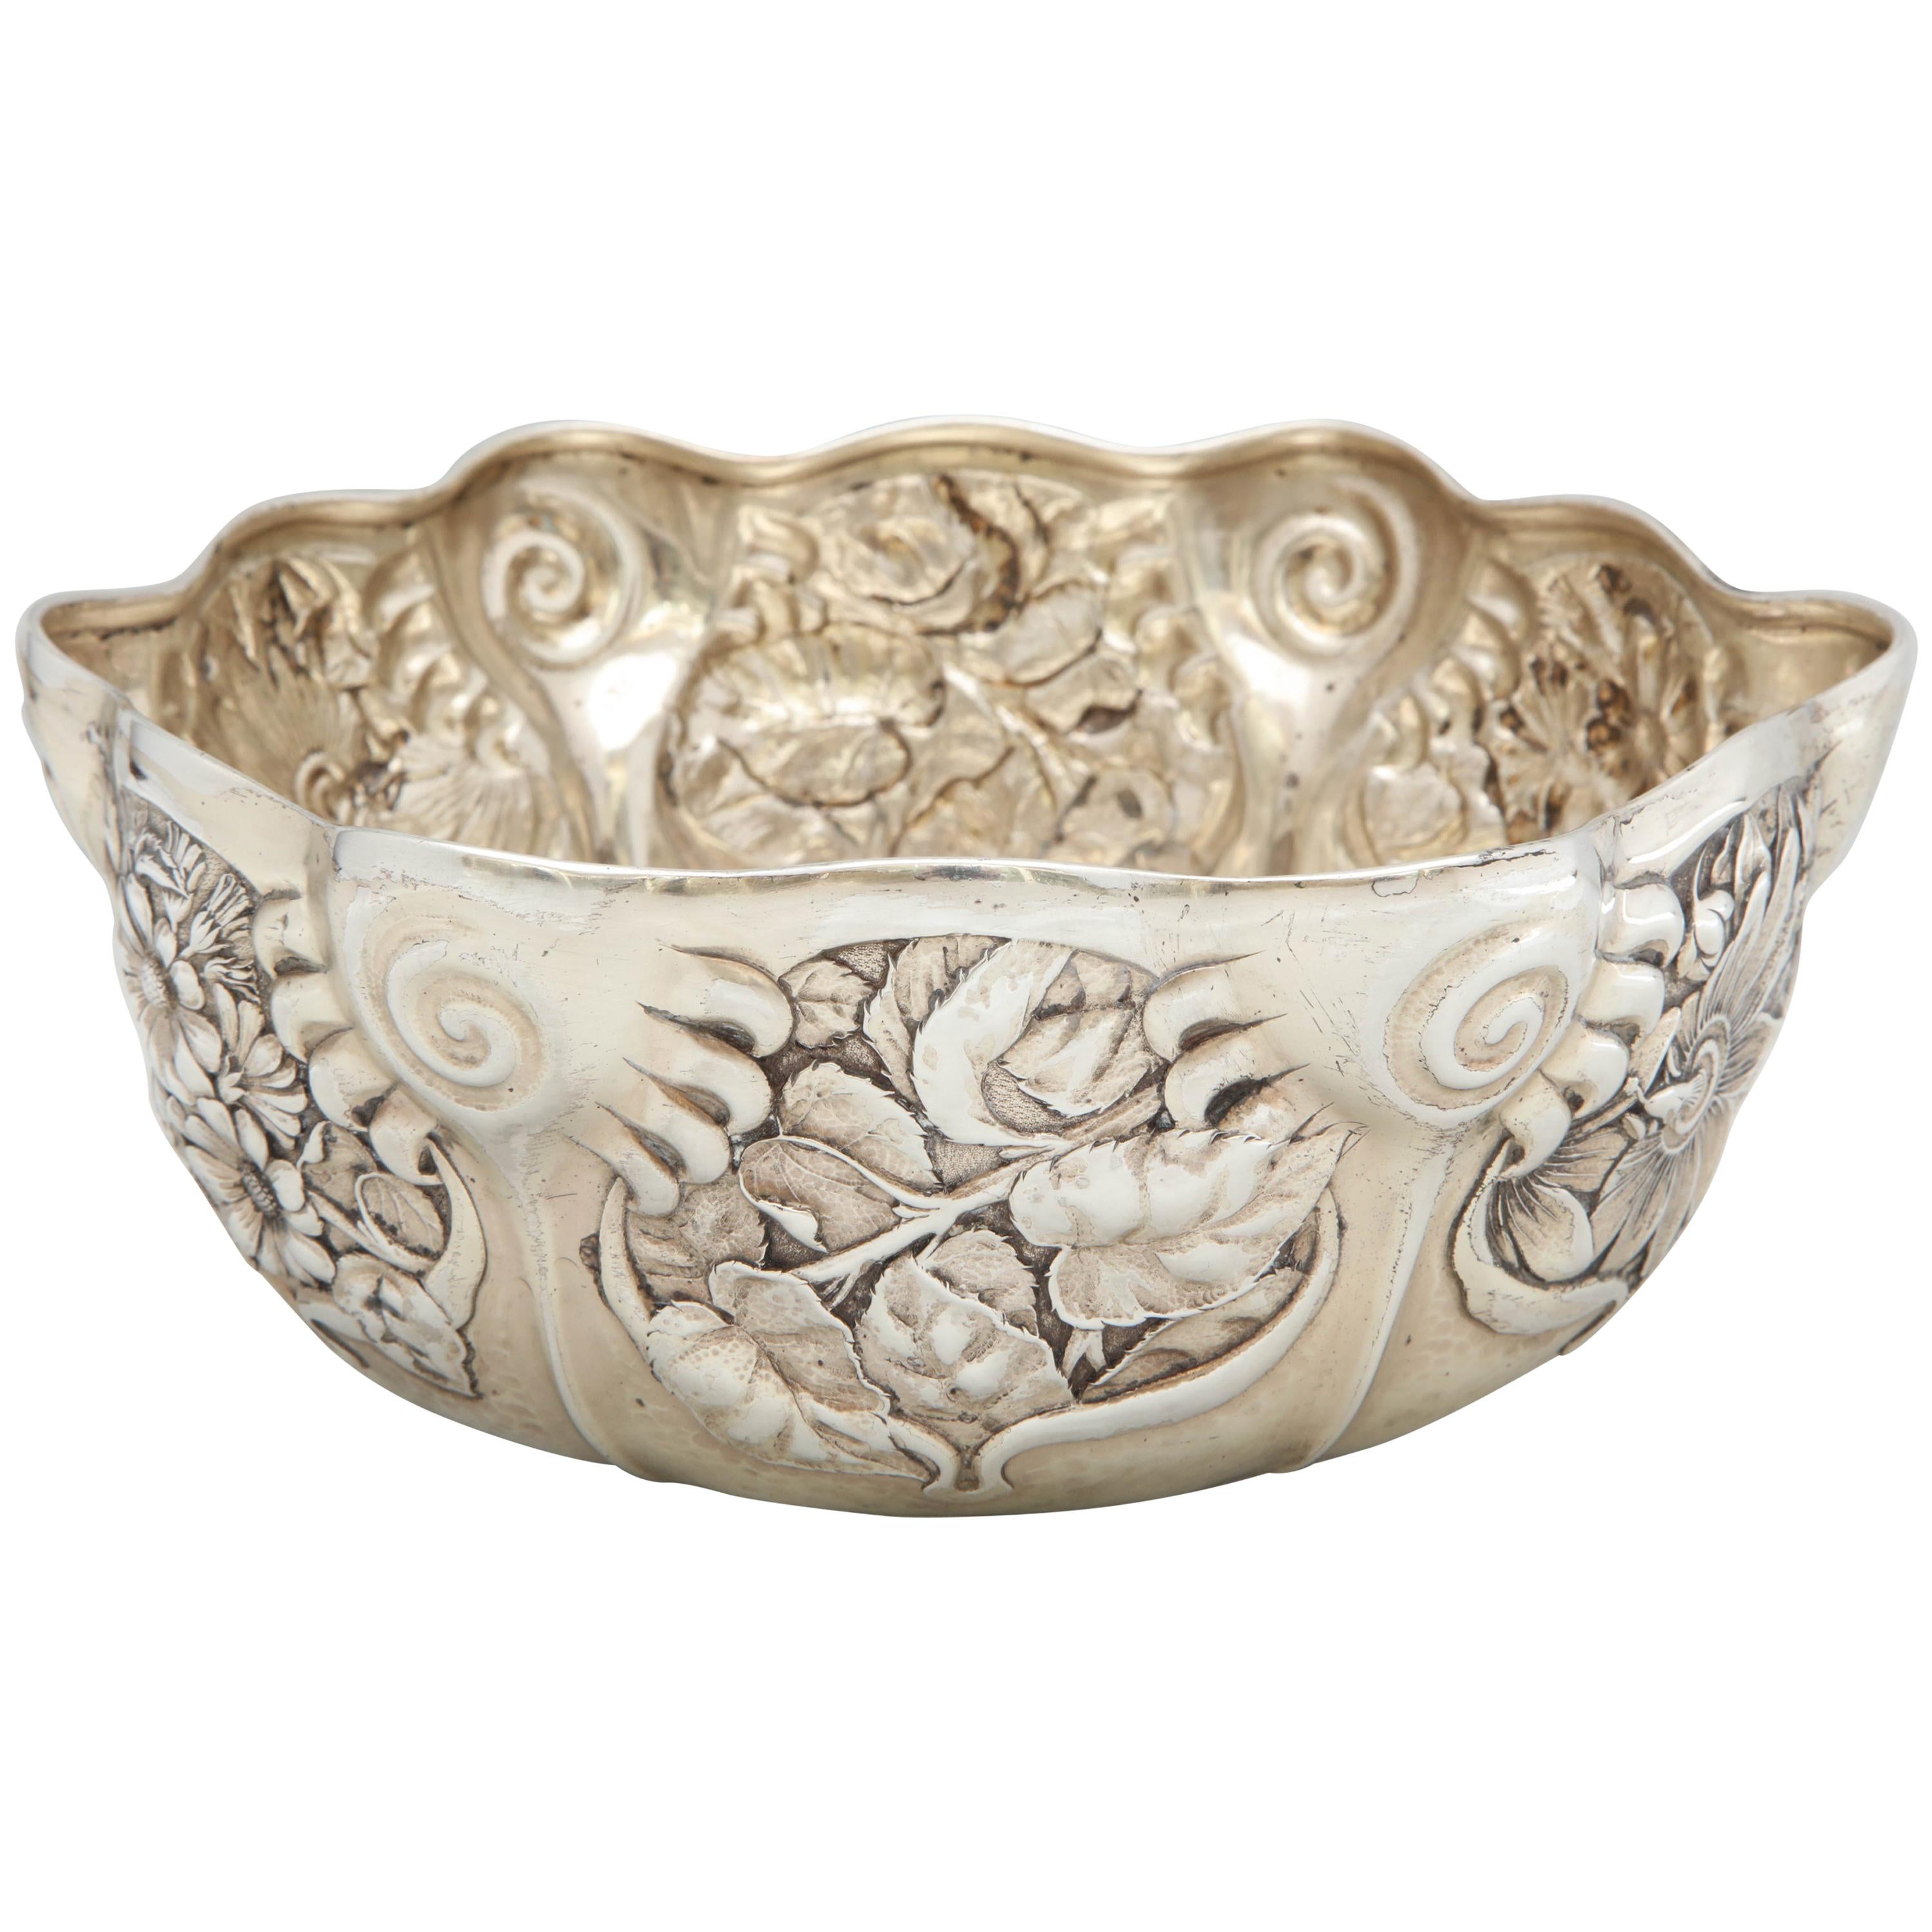 Art Nouveau Sterling Silver Serving Bowl by Whiting Mfg. Co